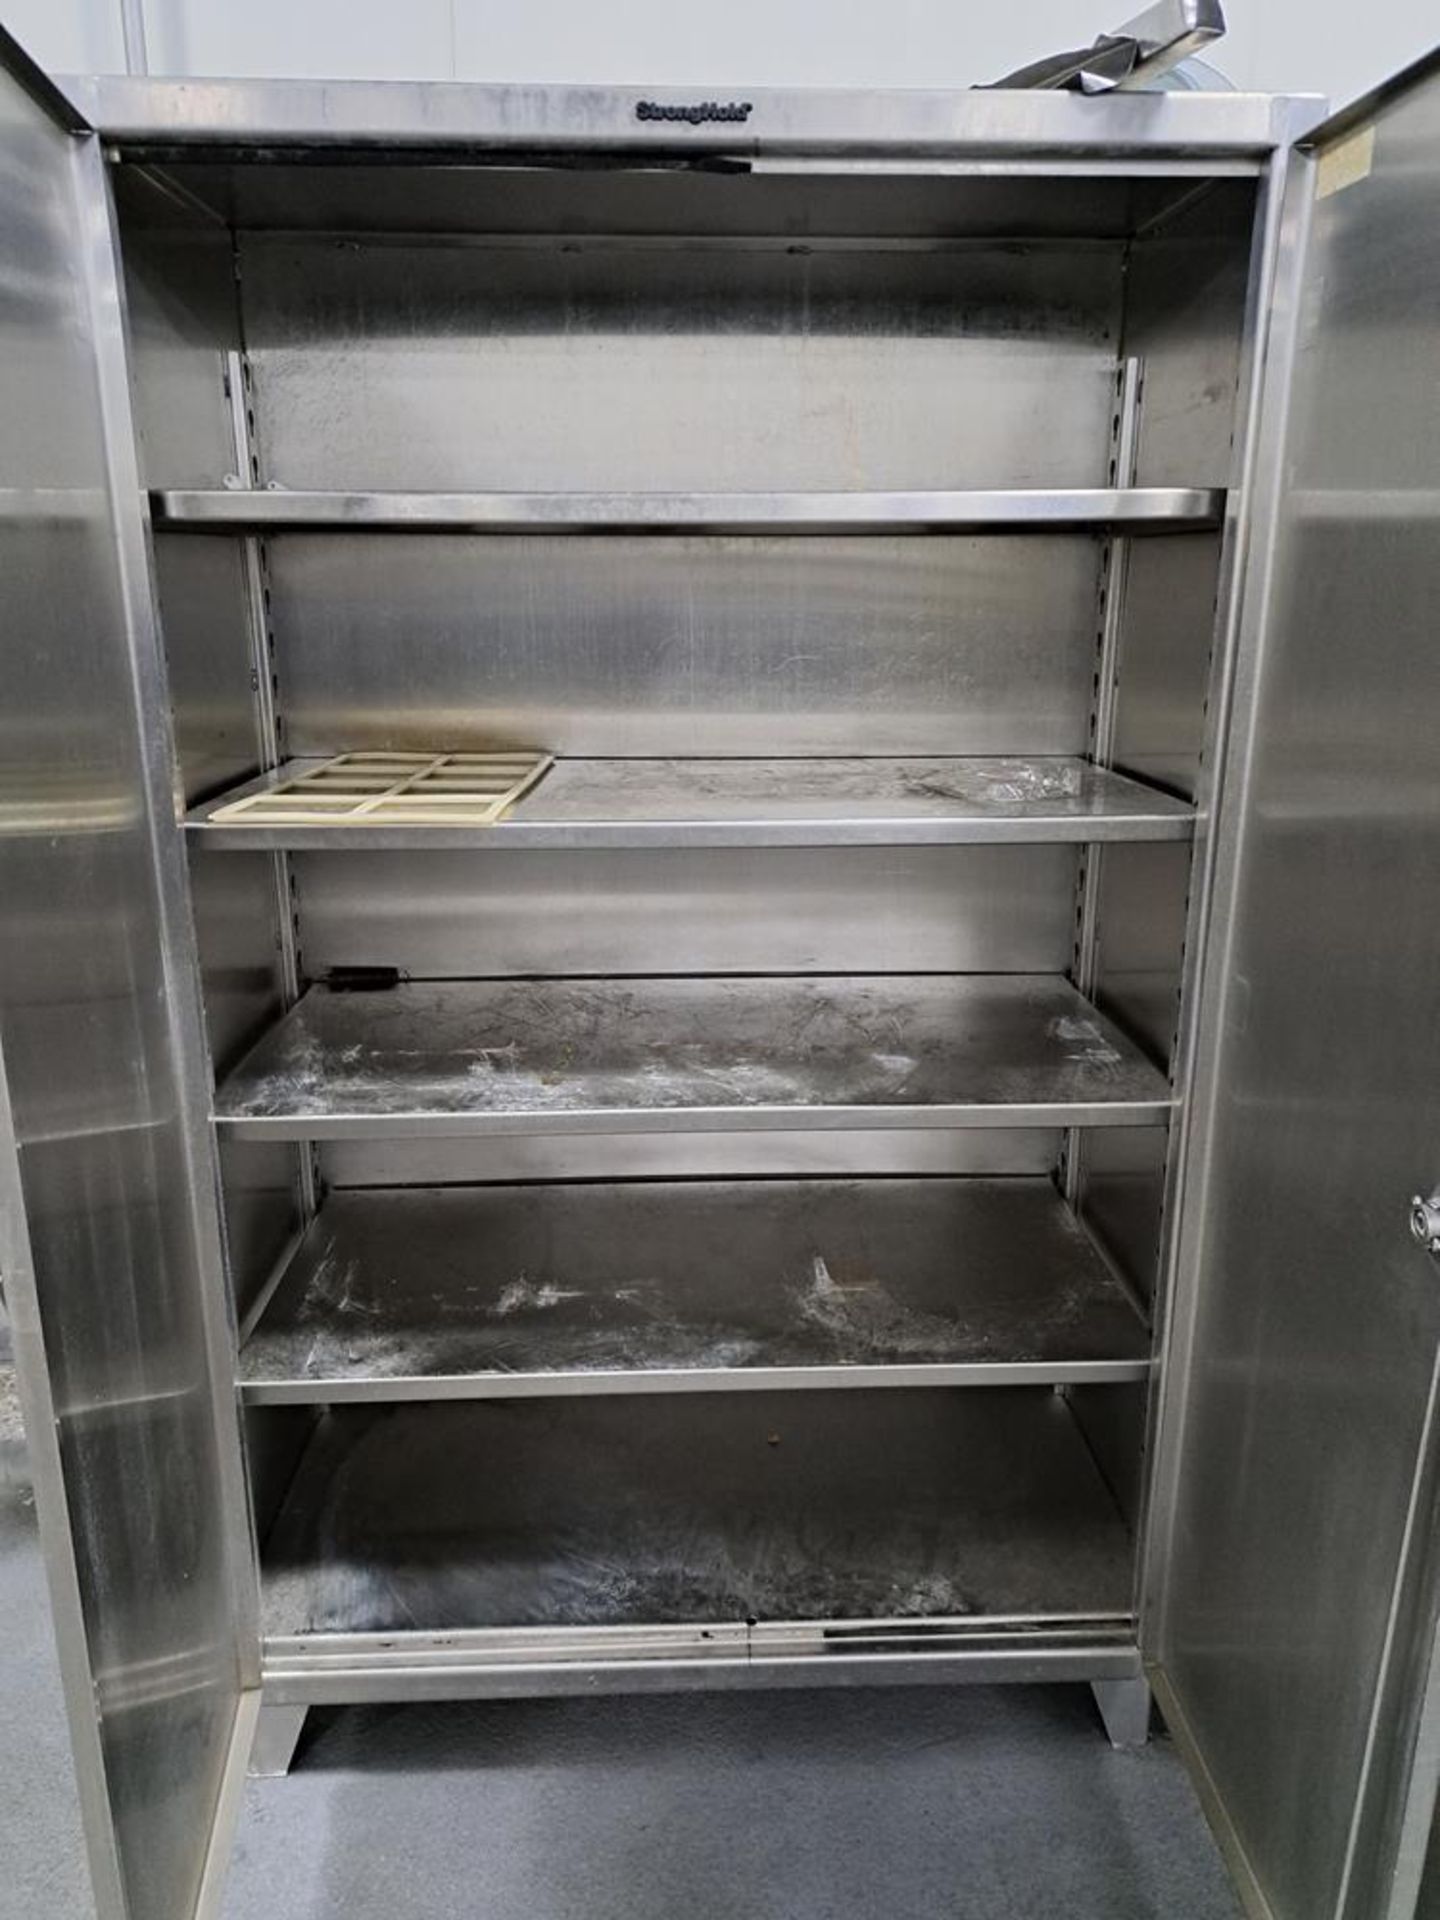 Stronghold Stainless Steel Cabinet, 48" W X 22" D X 78" T, 5-shelves: Required Loading Fee $75.00, - Image 2 of 2